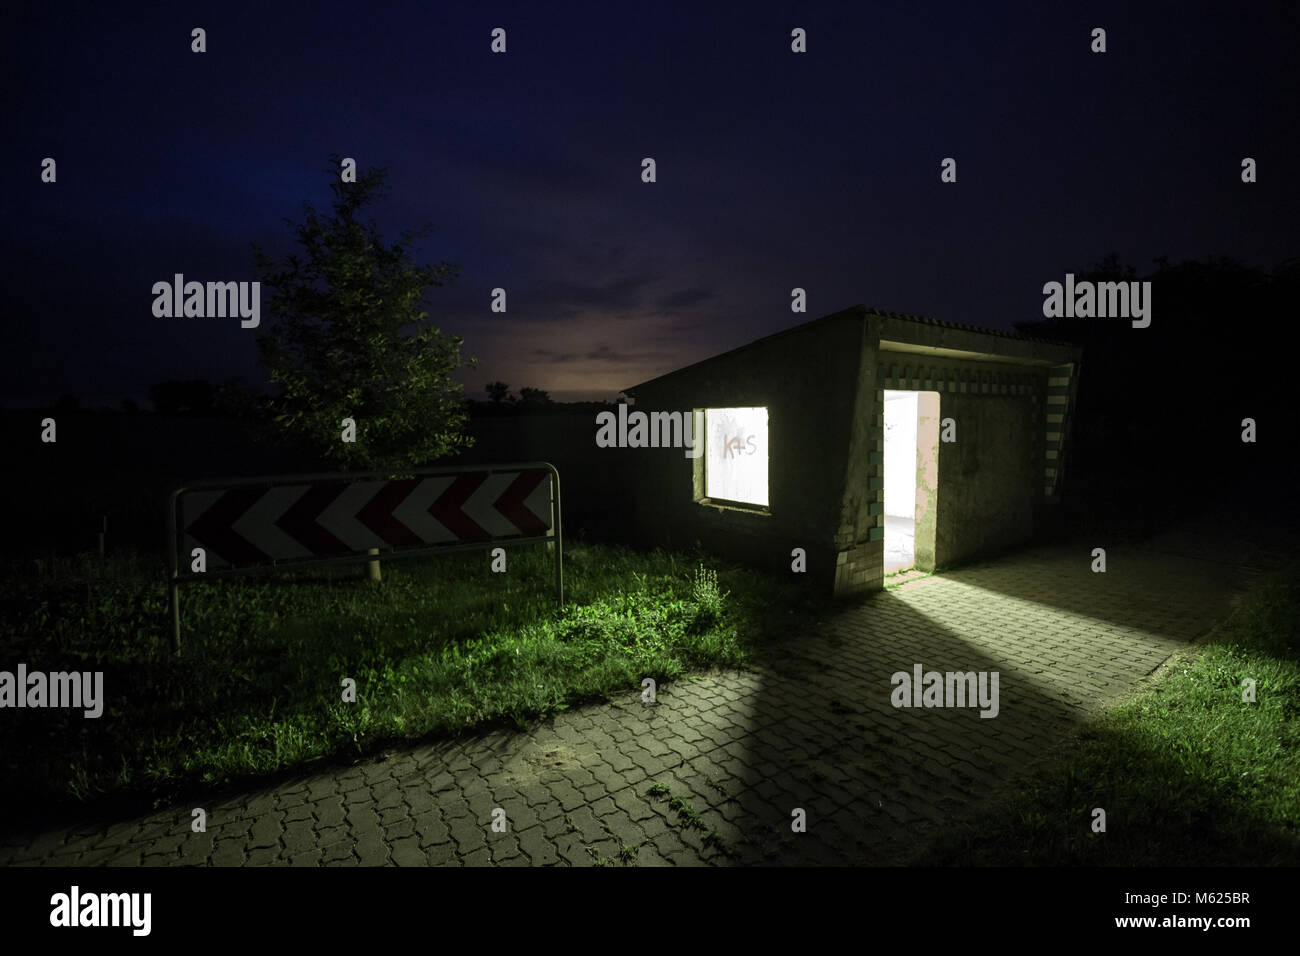 Illuminated bus shelter on the country side in the night. Carzig, Brandenburg, Germany, Europe. Stock Photo